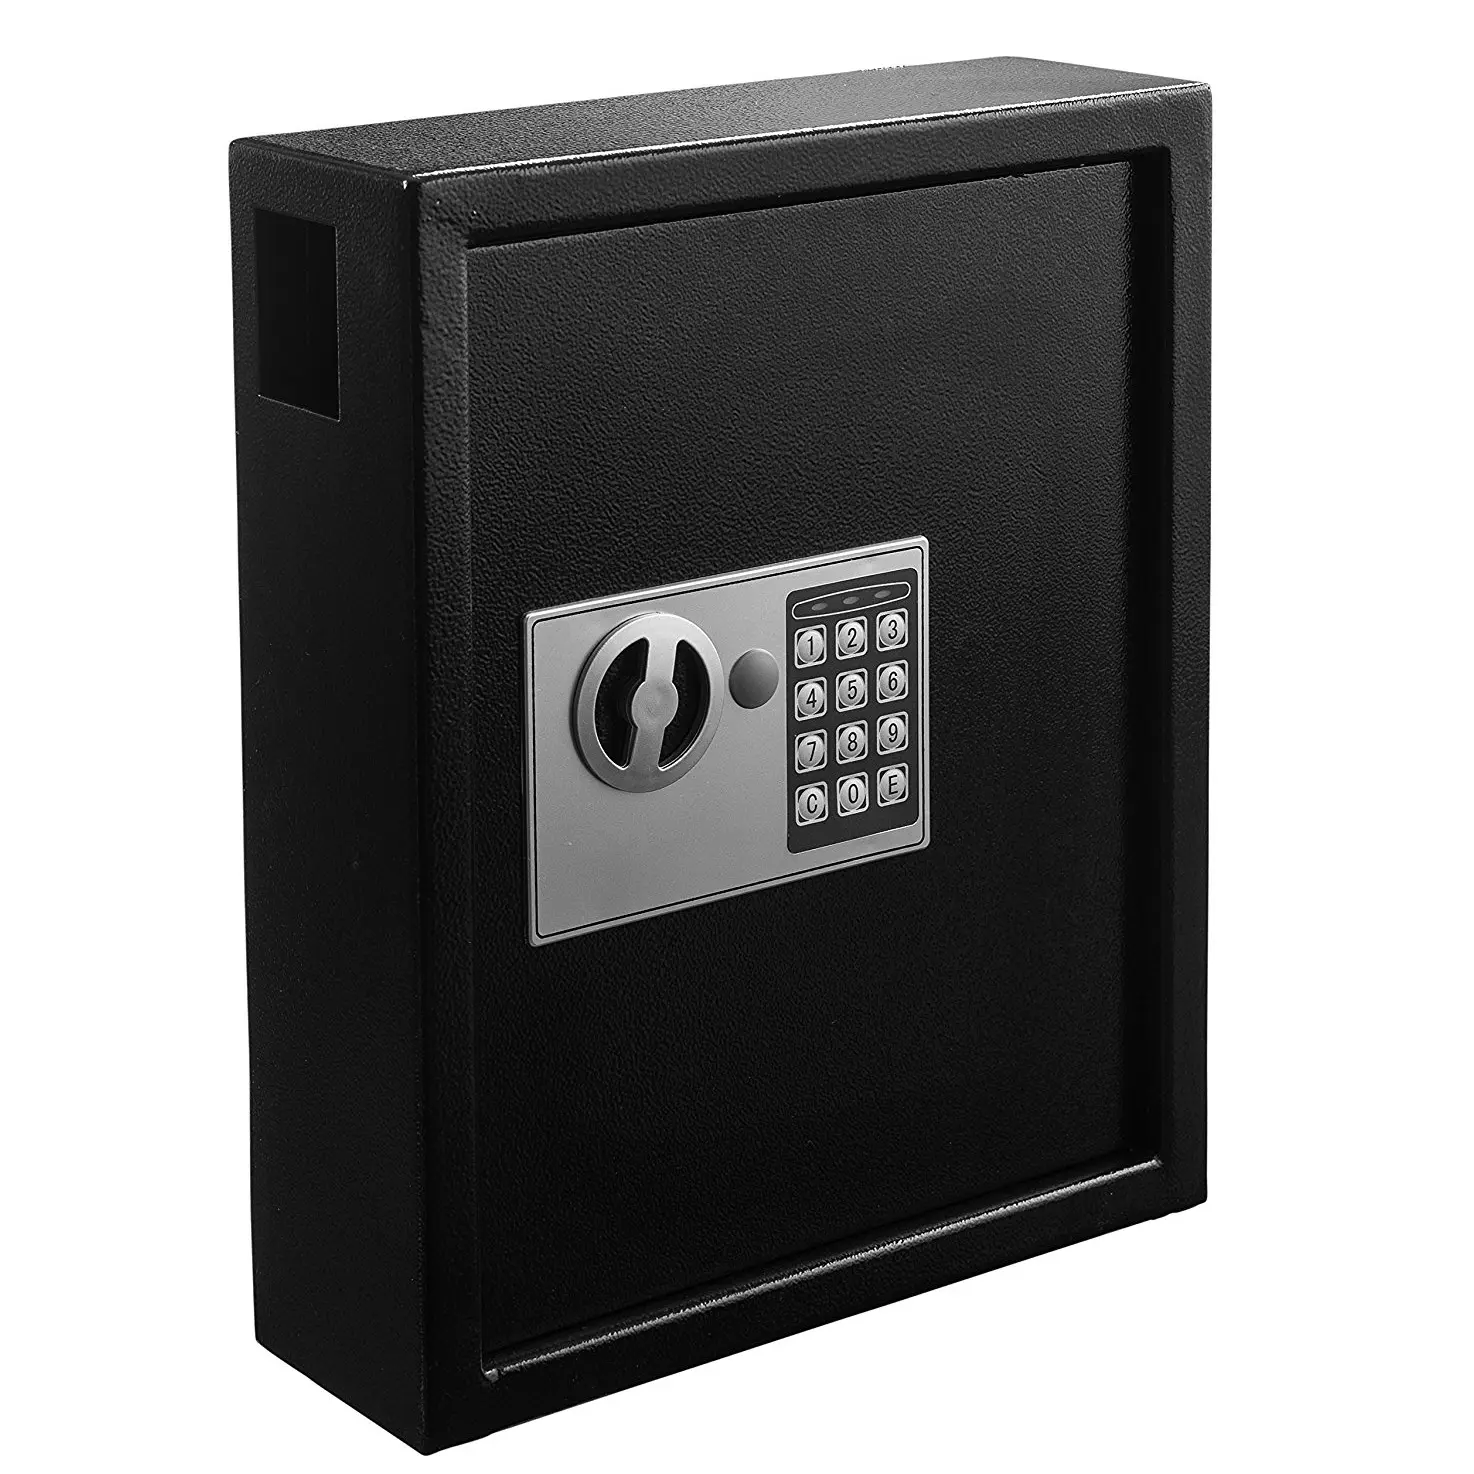 Home Office Electronic Digital 48 Key Large Safe Cabinet Combination Lock Solid Steel Security Key Cabinet Lock Box